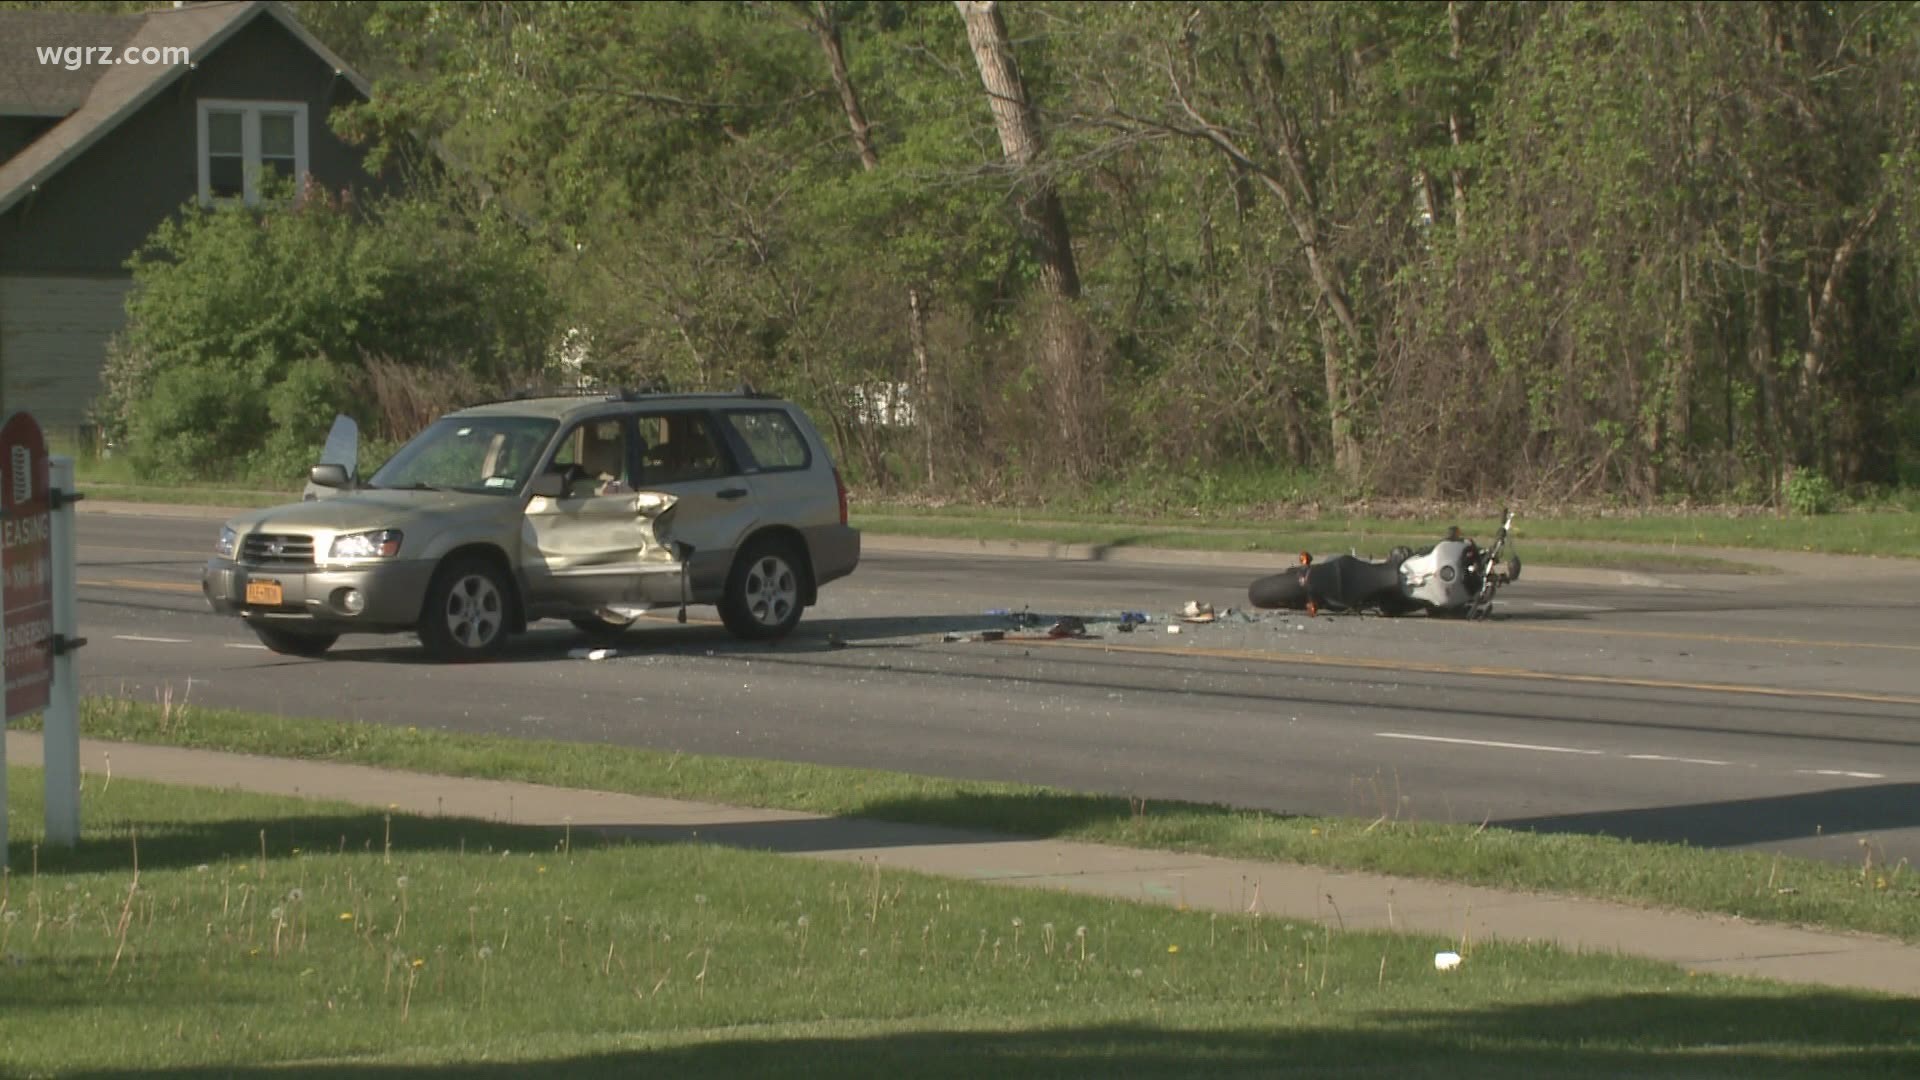 30-year-old motorcyclist killed in collision with SUV in Cheektowaga